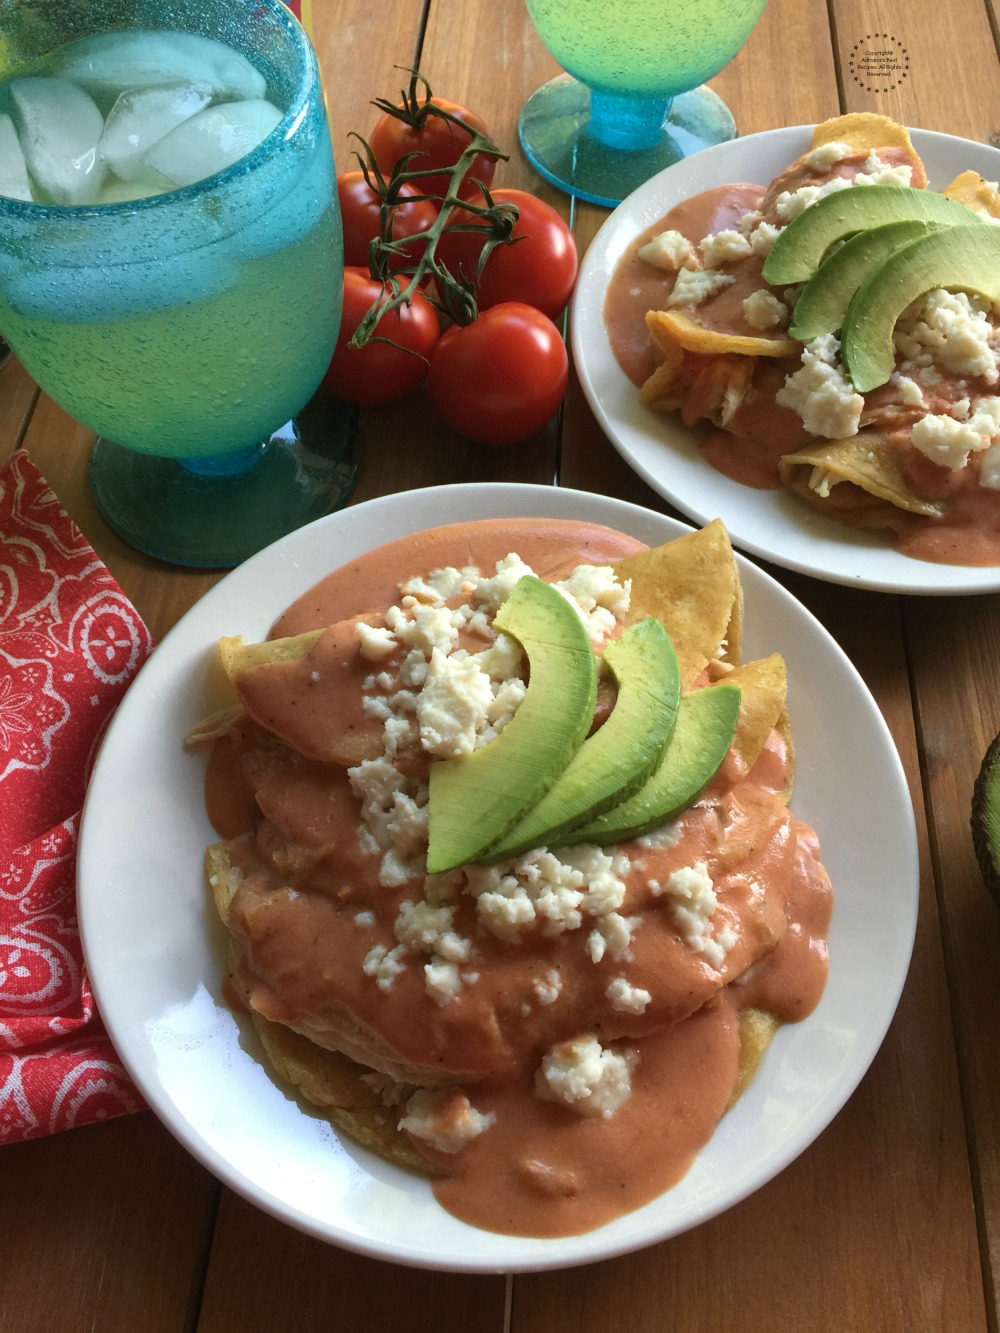 The creamy tomato enchiladas recipe is a staple of my family's heritage and an easy meal for back to school. You can have dinner ready in just 30 minutes